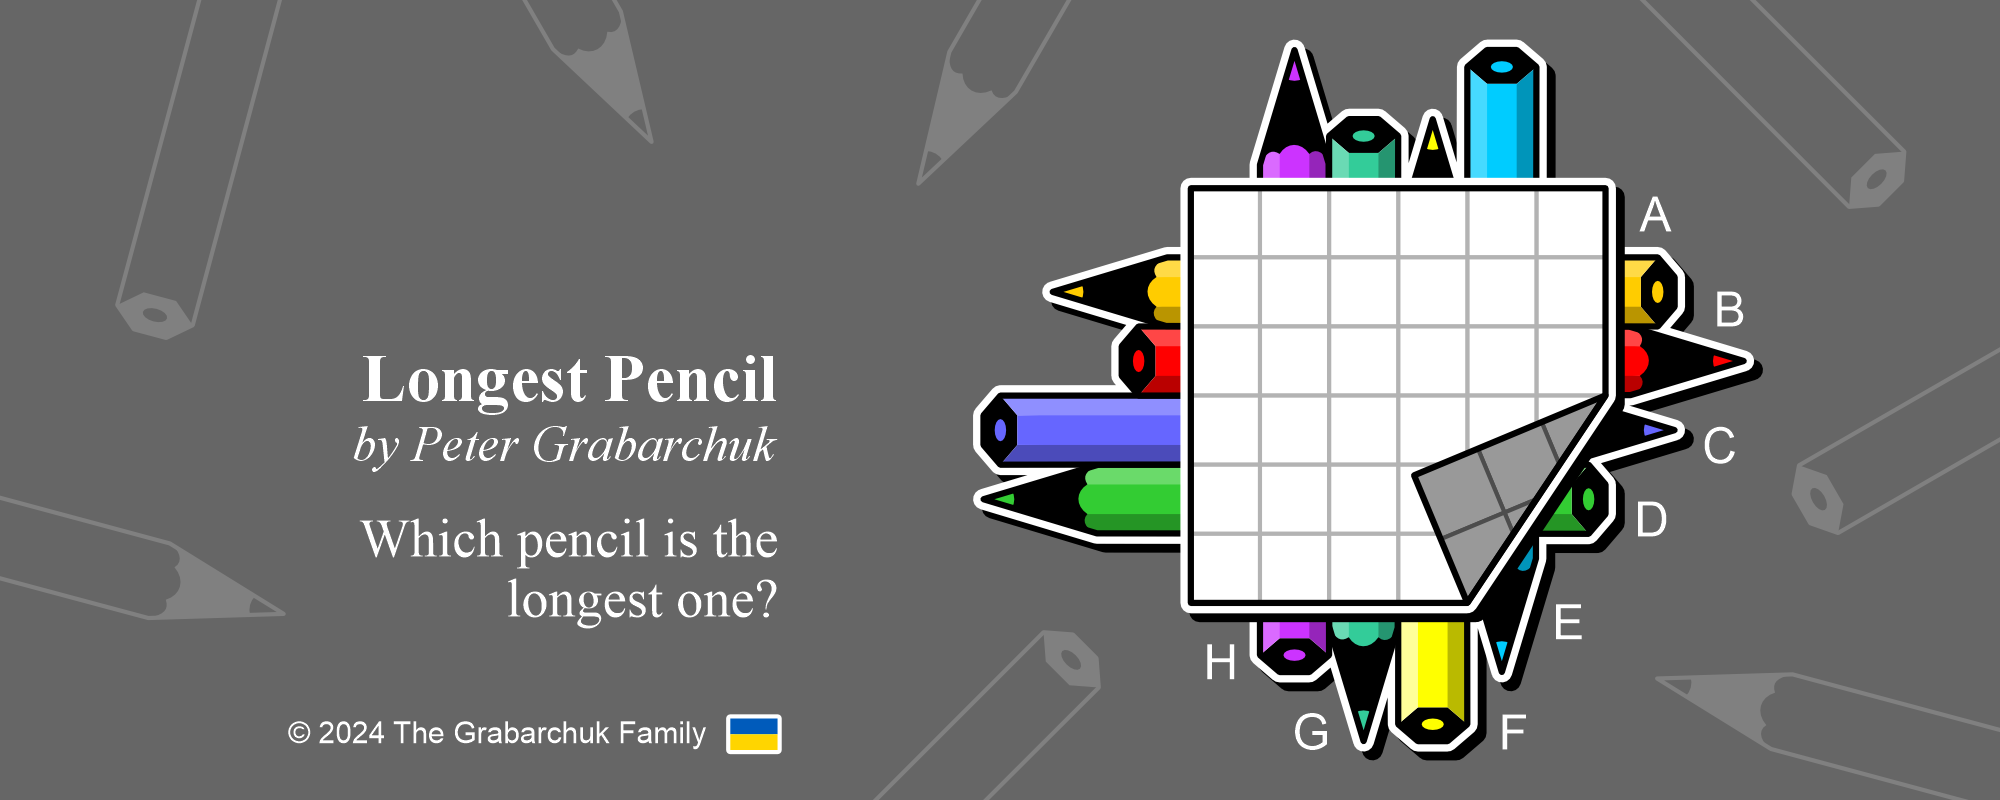 Longest Pencil by Peter Grabarchuk